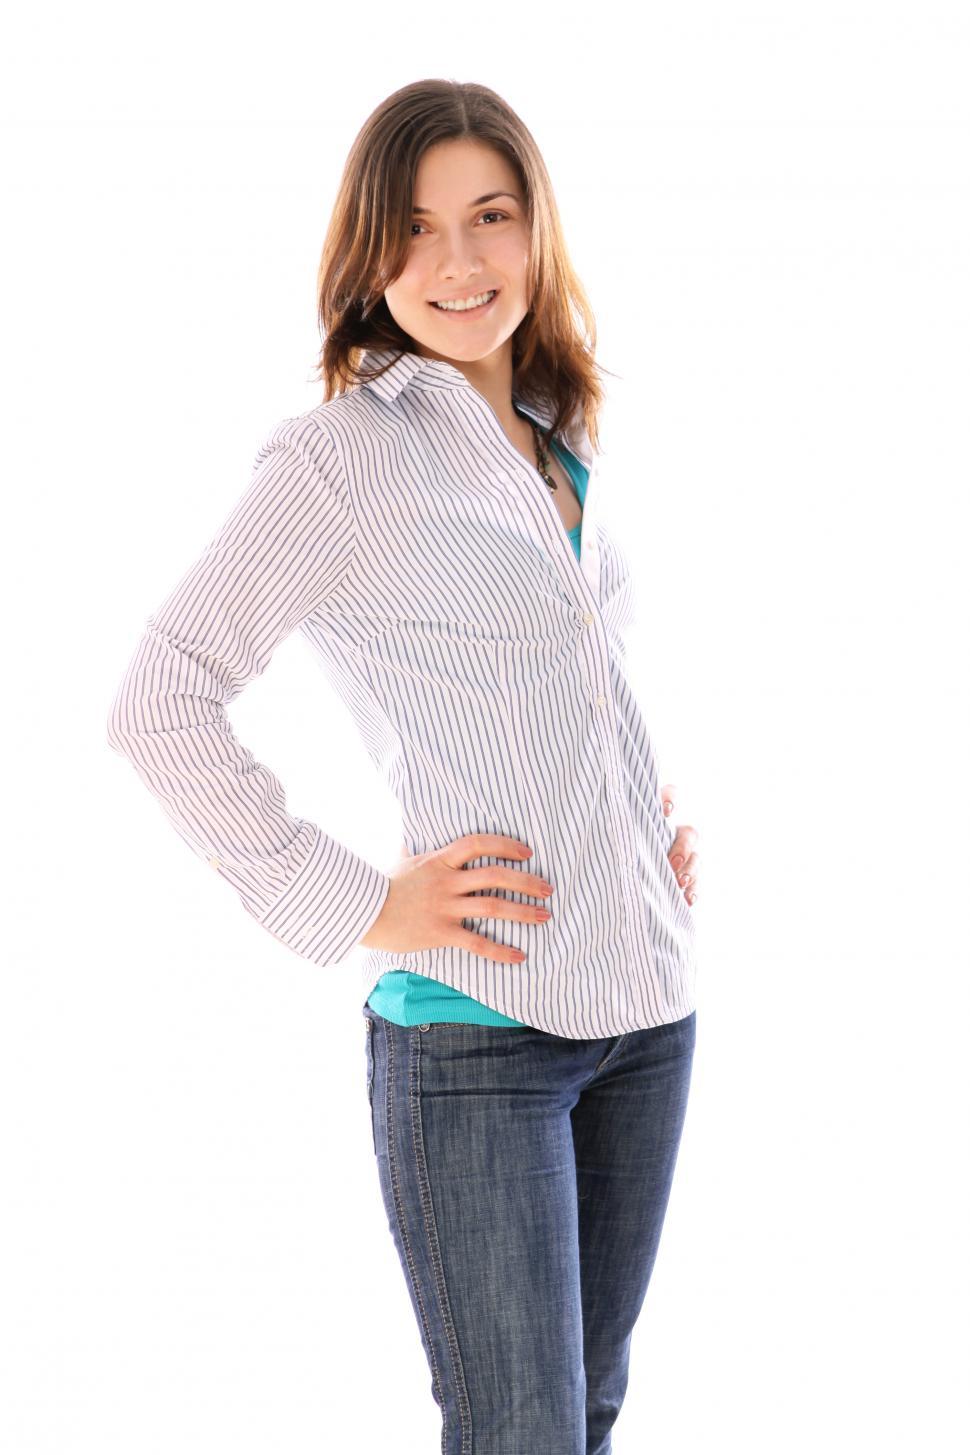 Free Image of Friendly young woman standing  